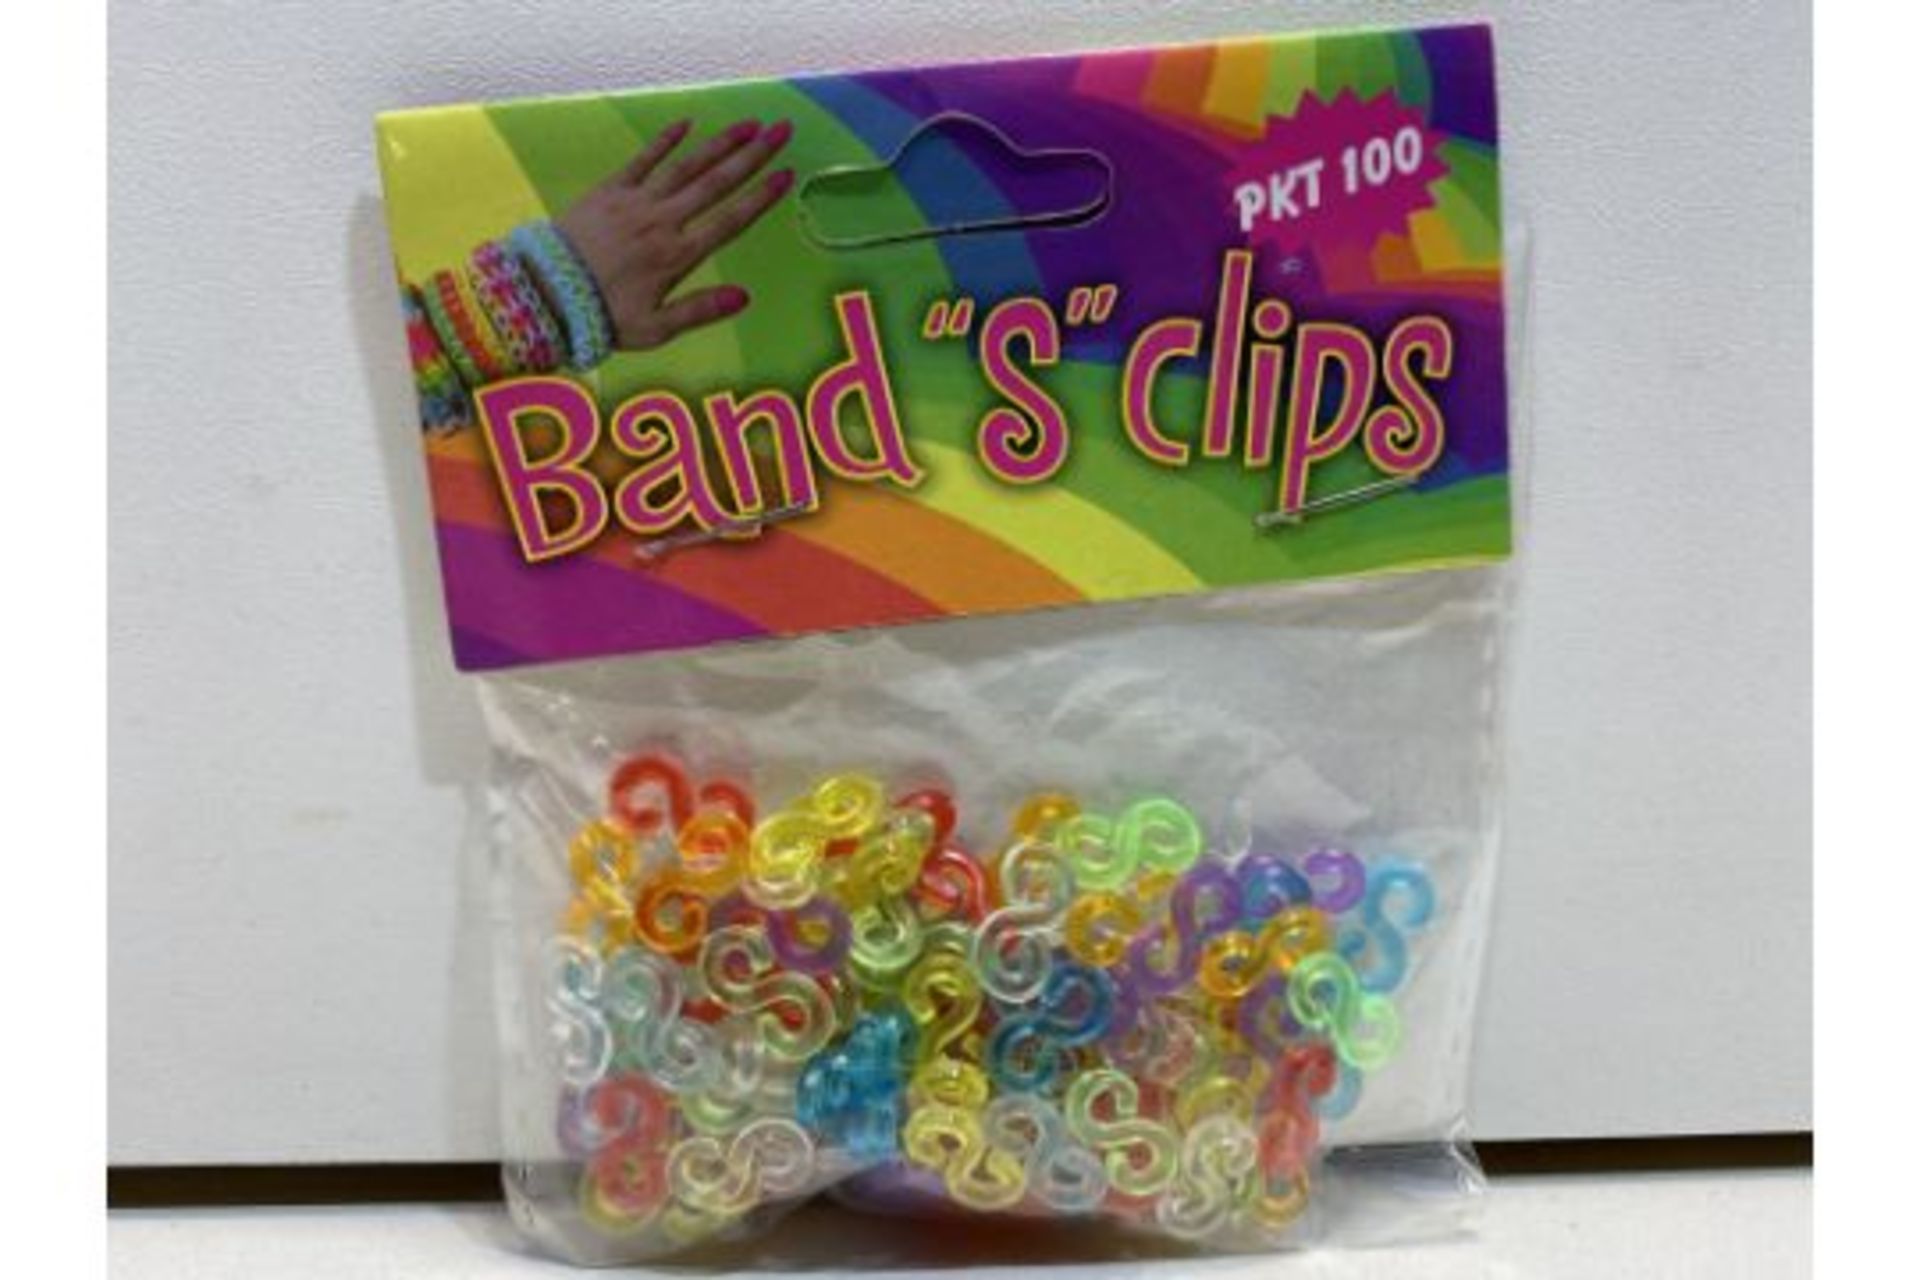 80 x Band "S" Clips (Pkt 100) | 9328645010019